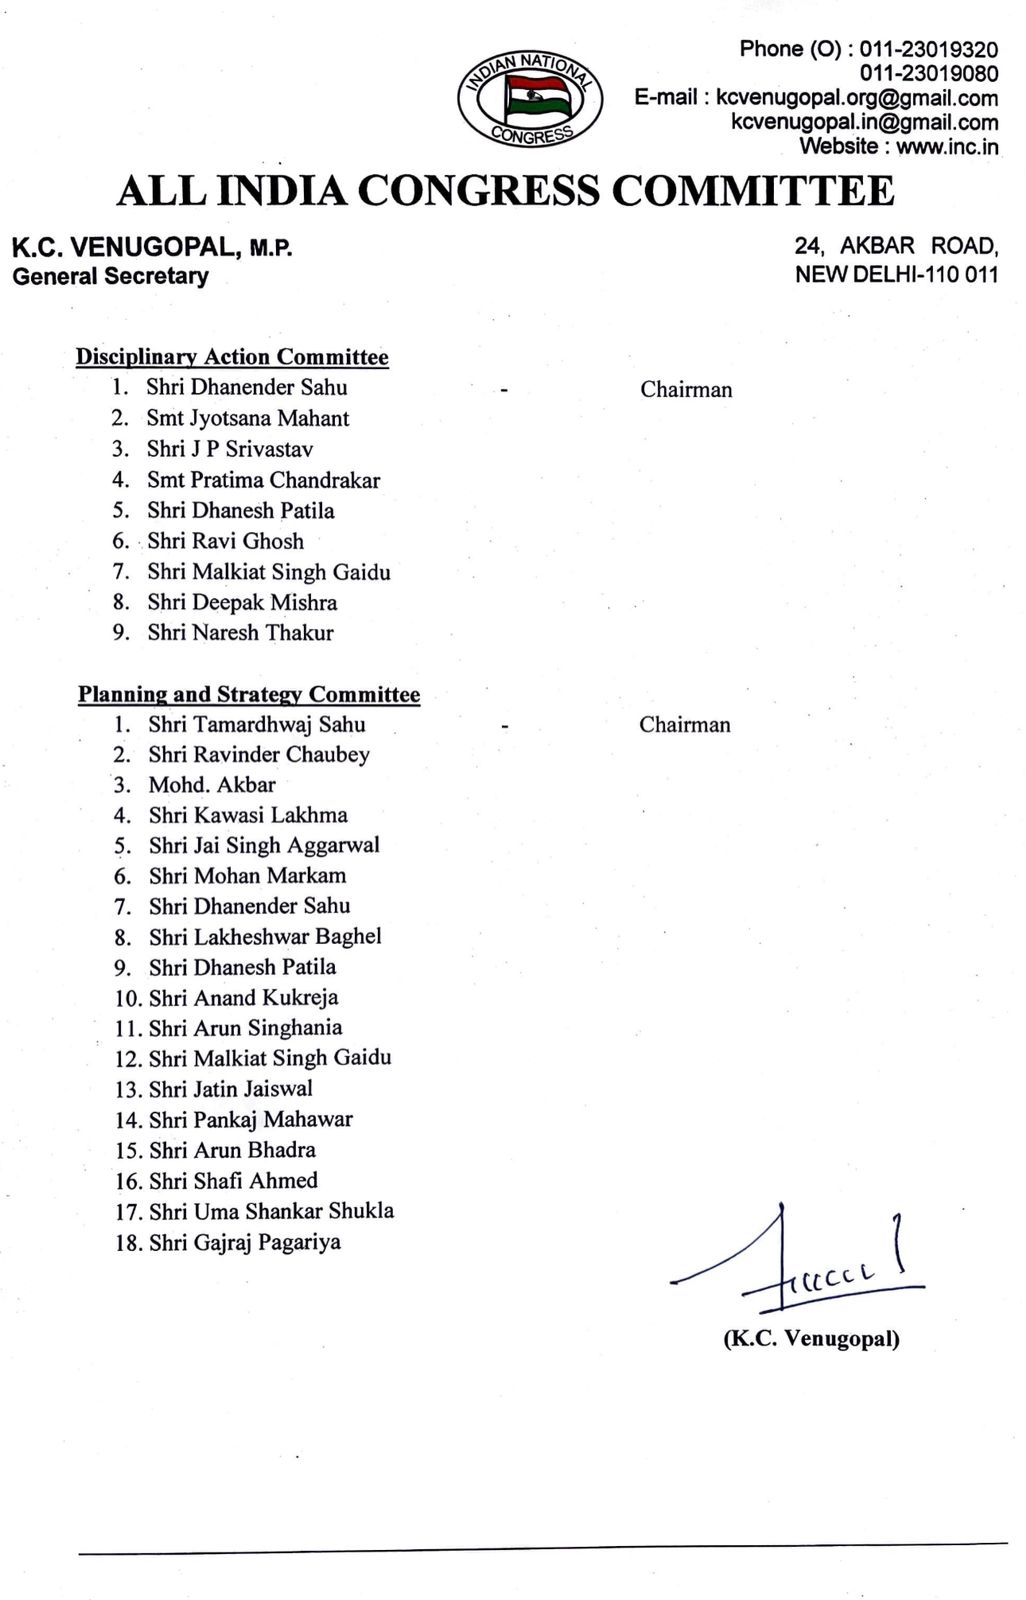 Chhattisgarh Polls: Congress Appoints District Presidents, Forms 23-Member Manifesto Committee, 3 More Panels